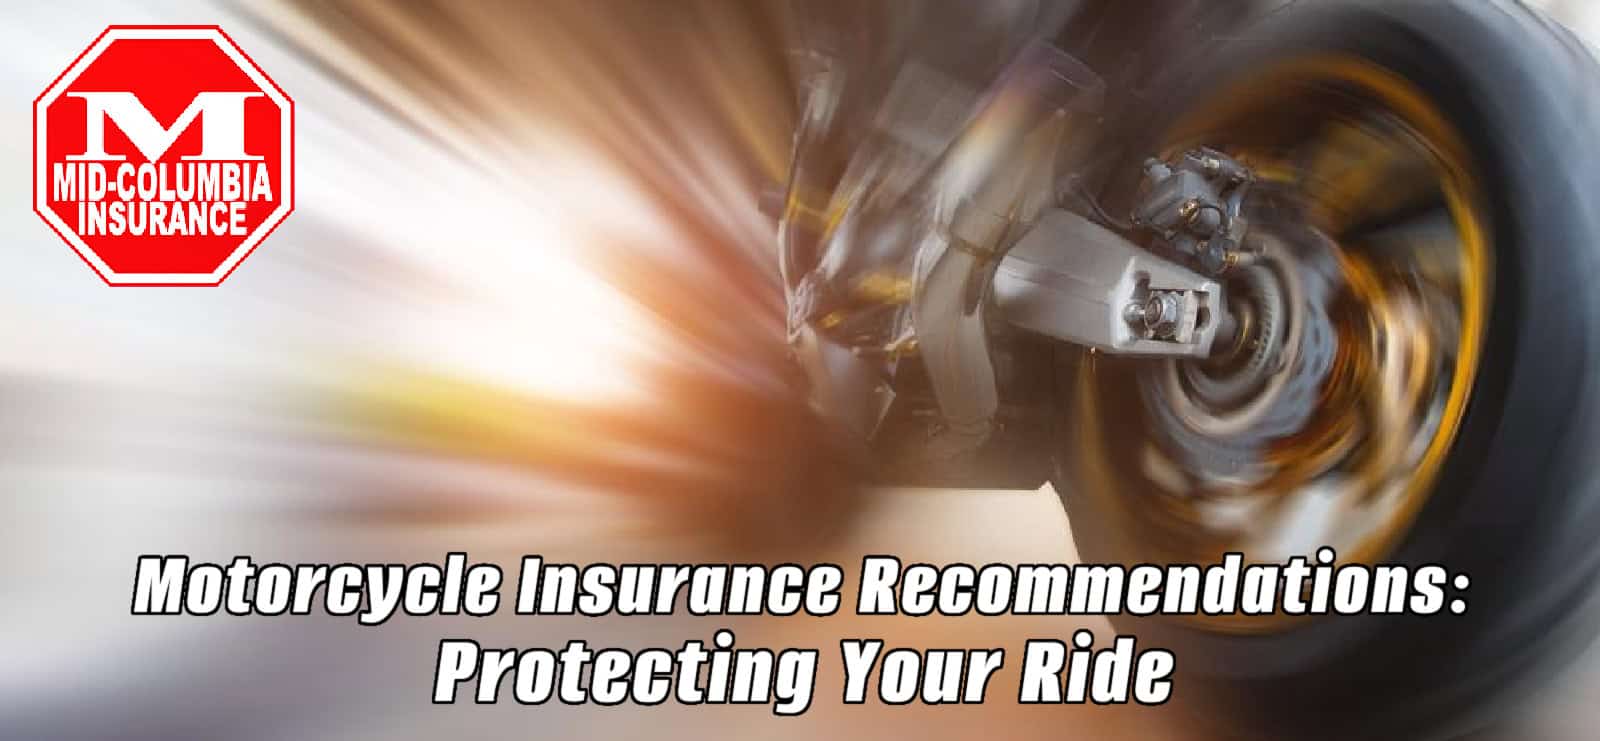 Motorcycle Motion Speeding On The Road Riding. Motorcycle Insurance Recommendations: Protecting Your Ride